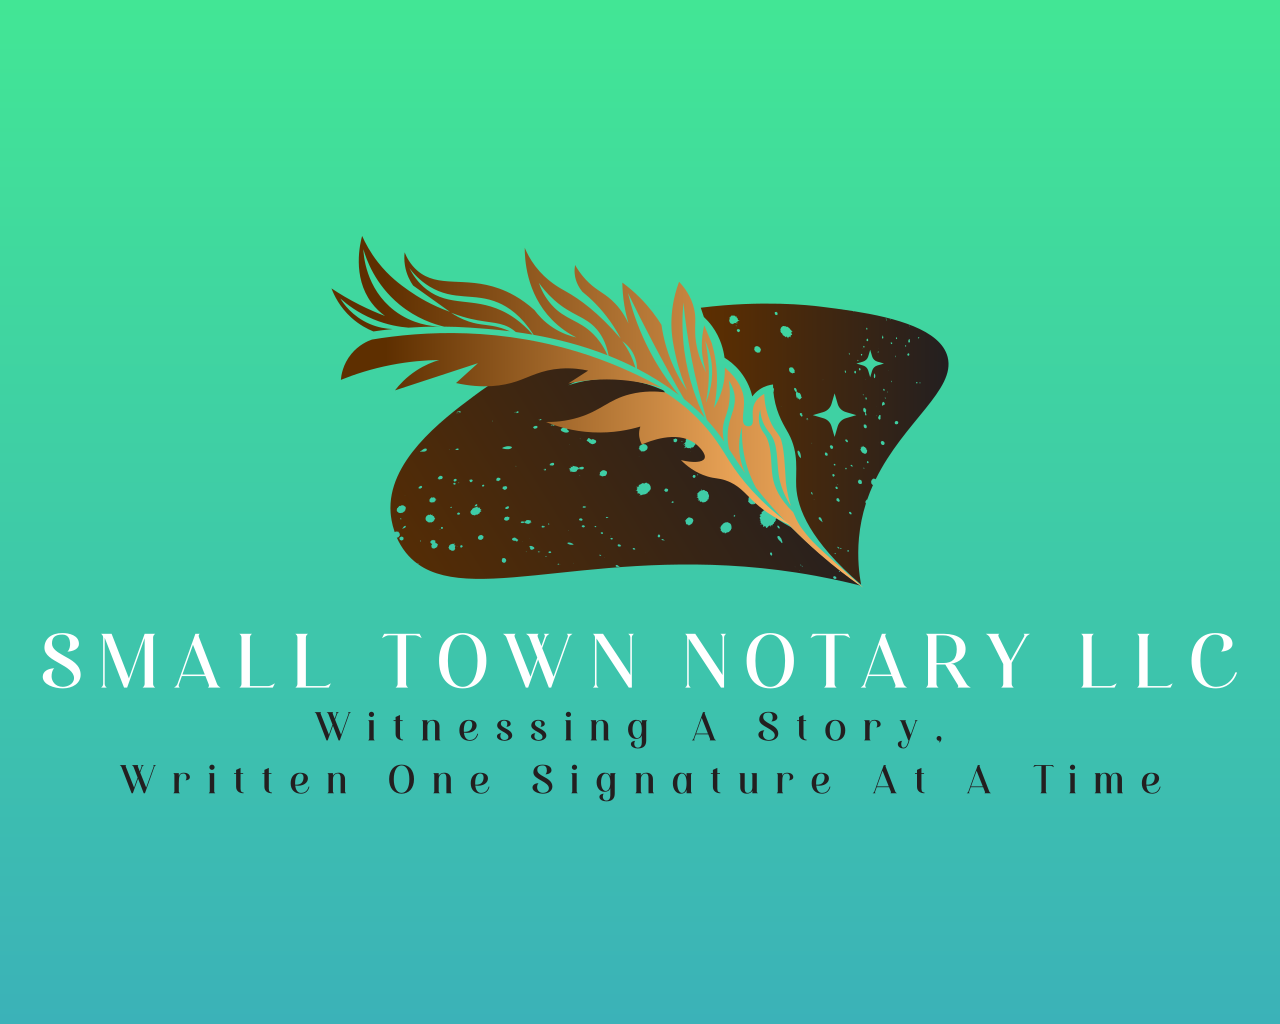 Small Town Notary LLC